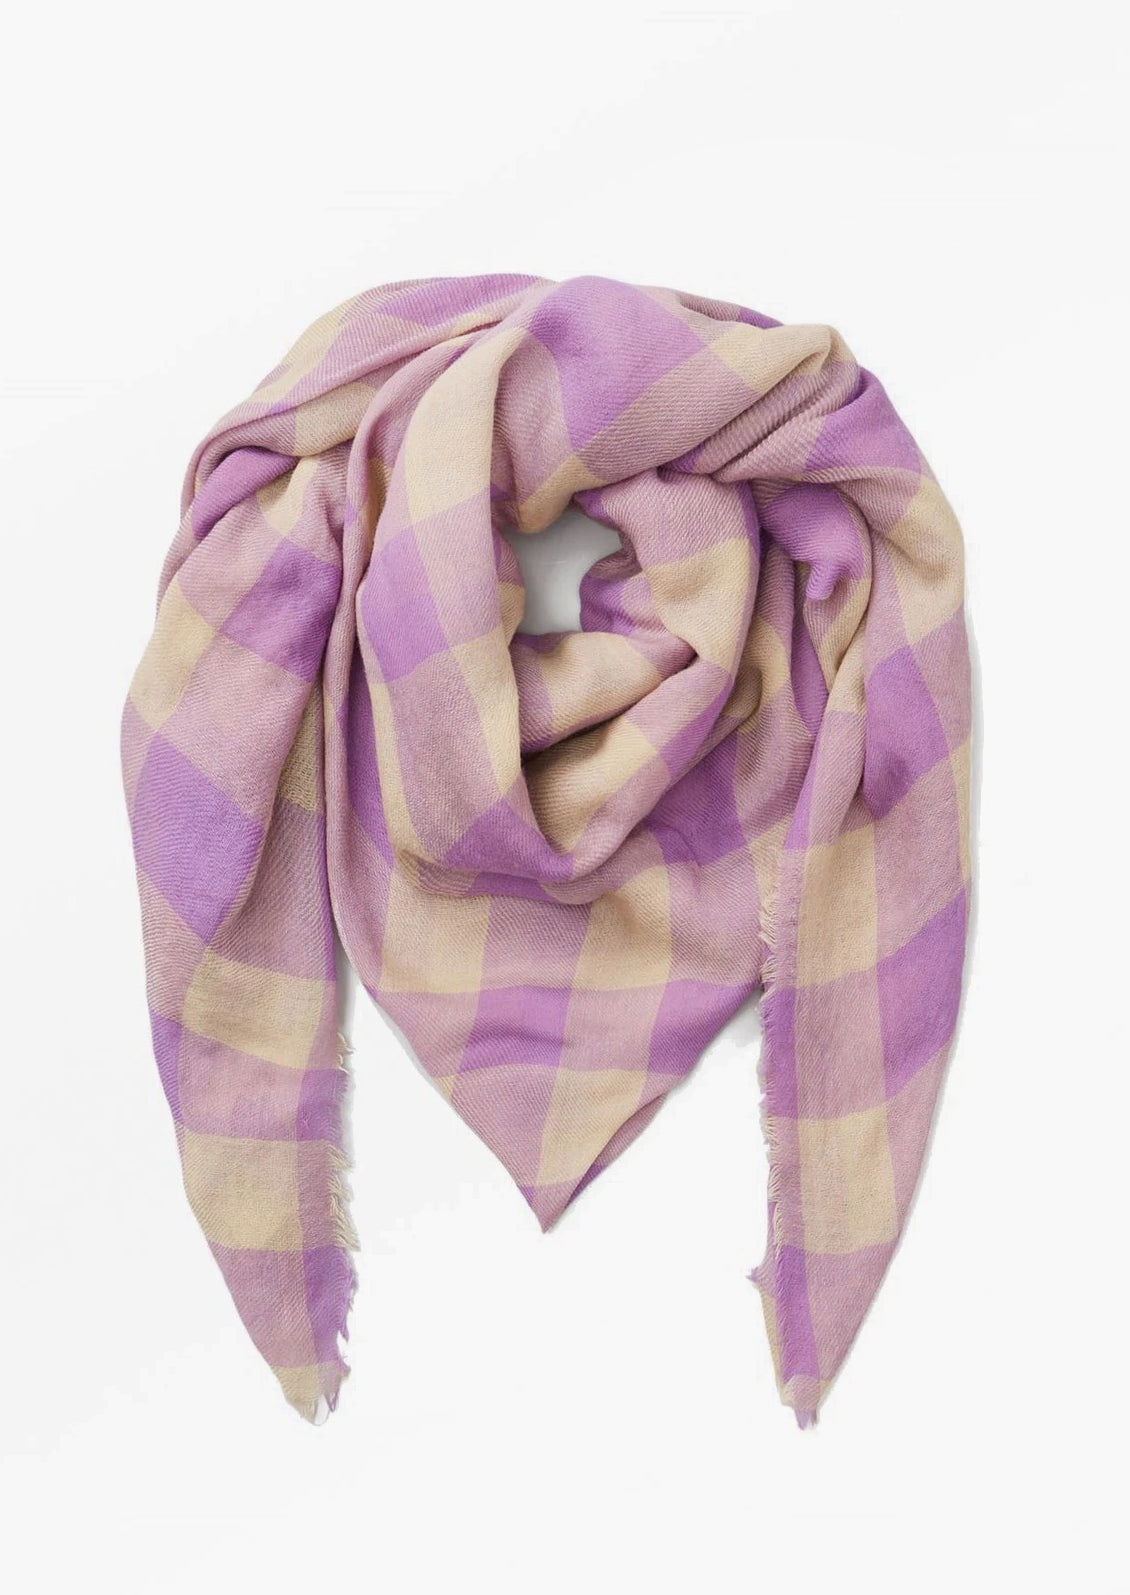 A gingham print scarf in purple and tan.